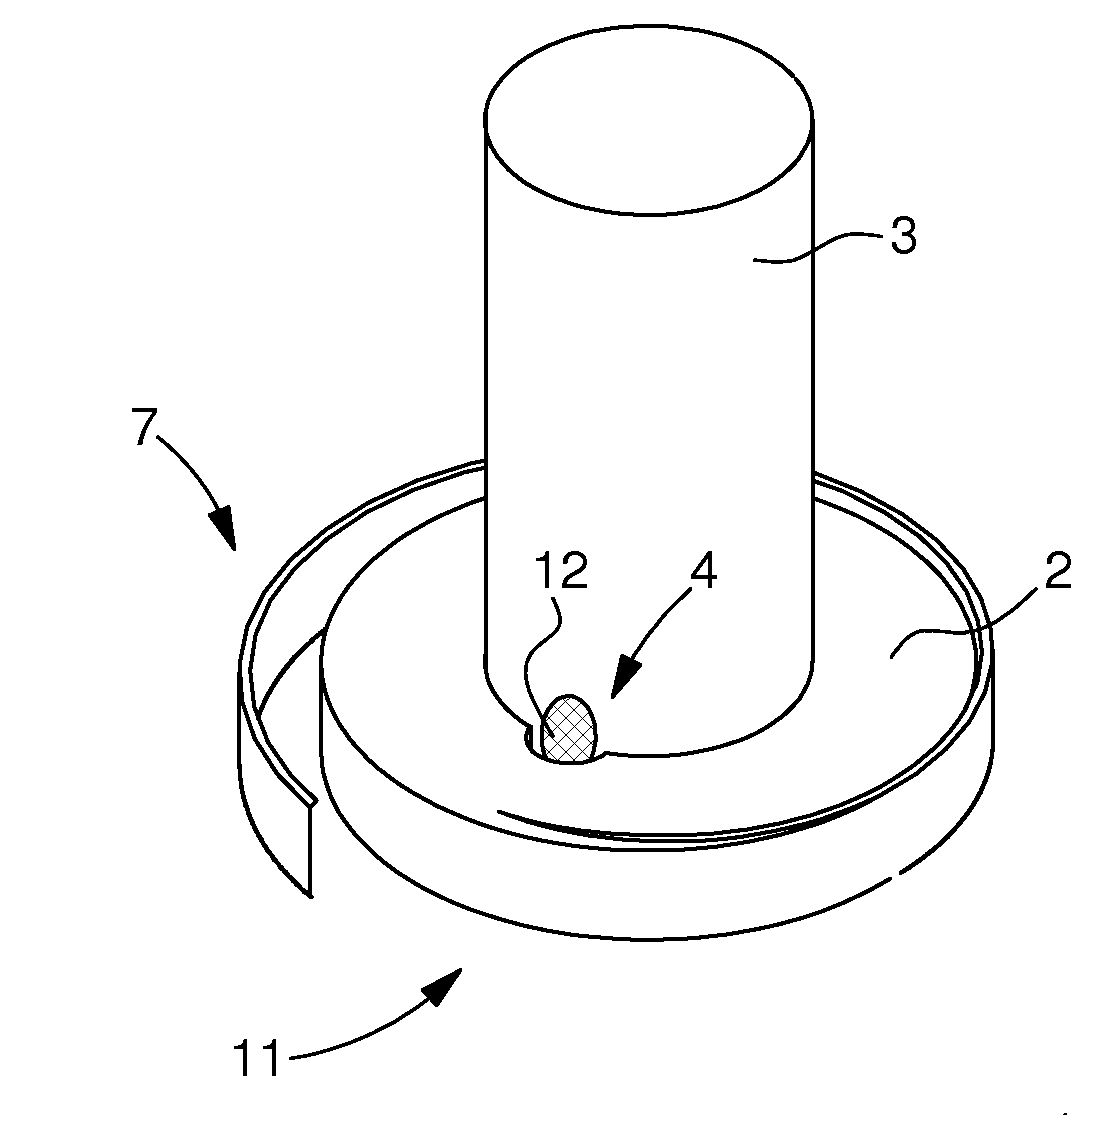 System for securing a part without driving in or bonding